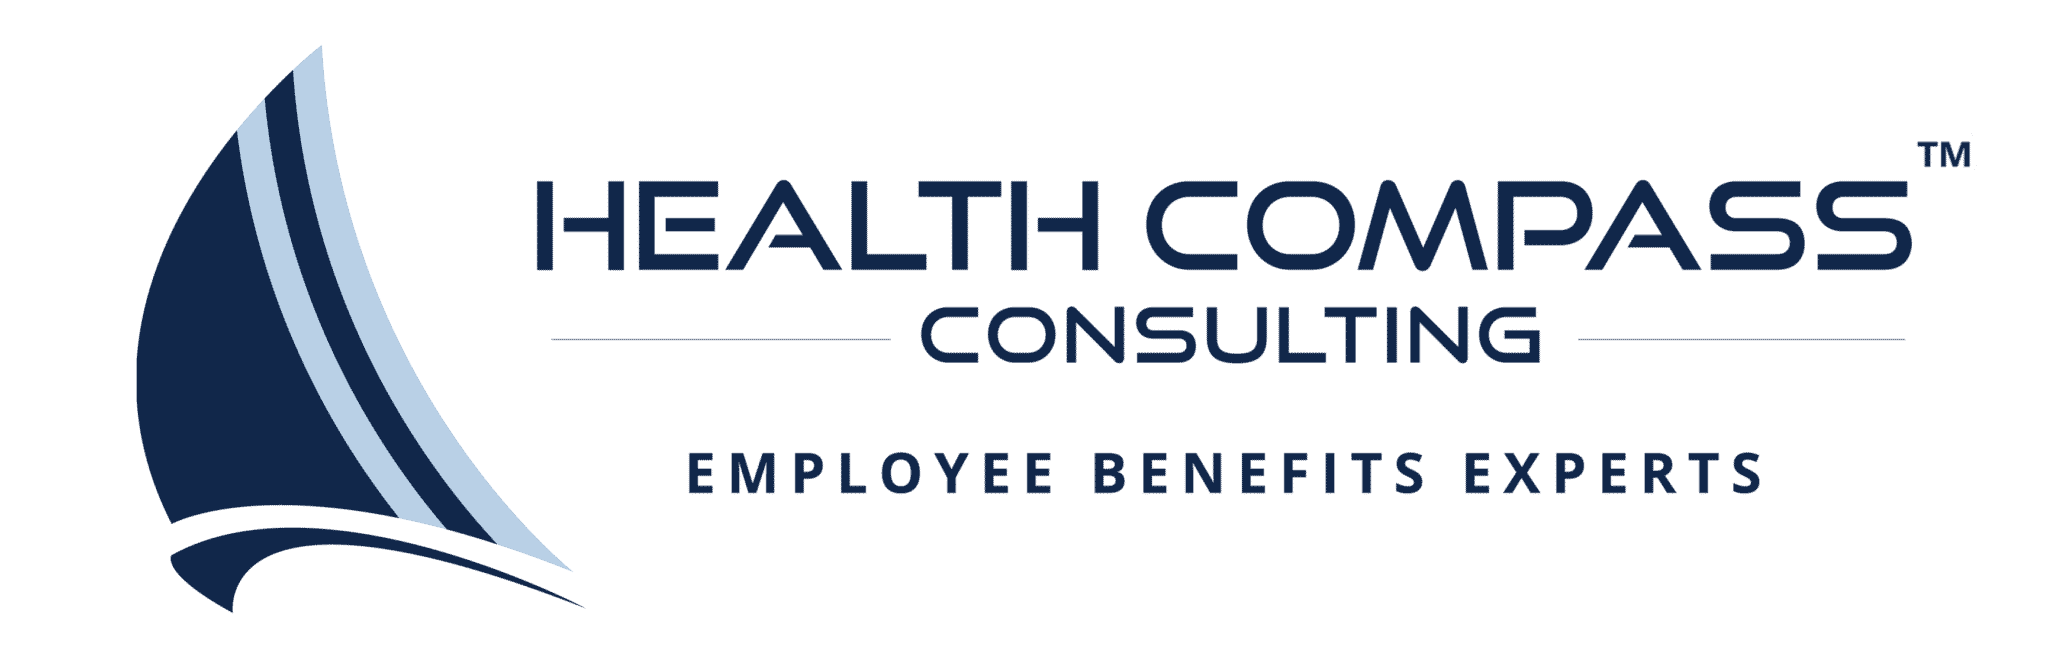 health compass consulting